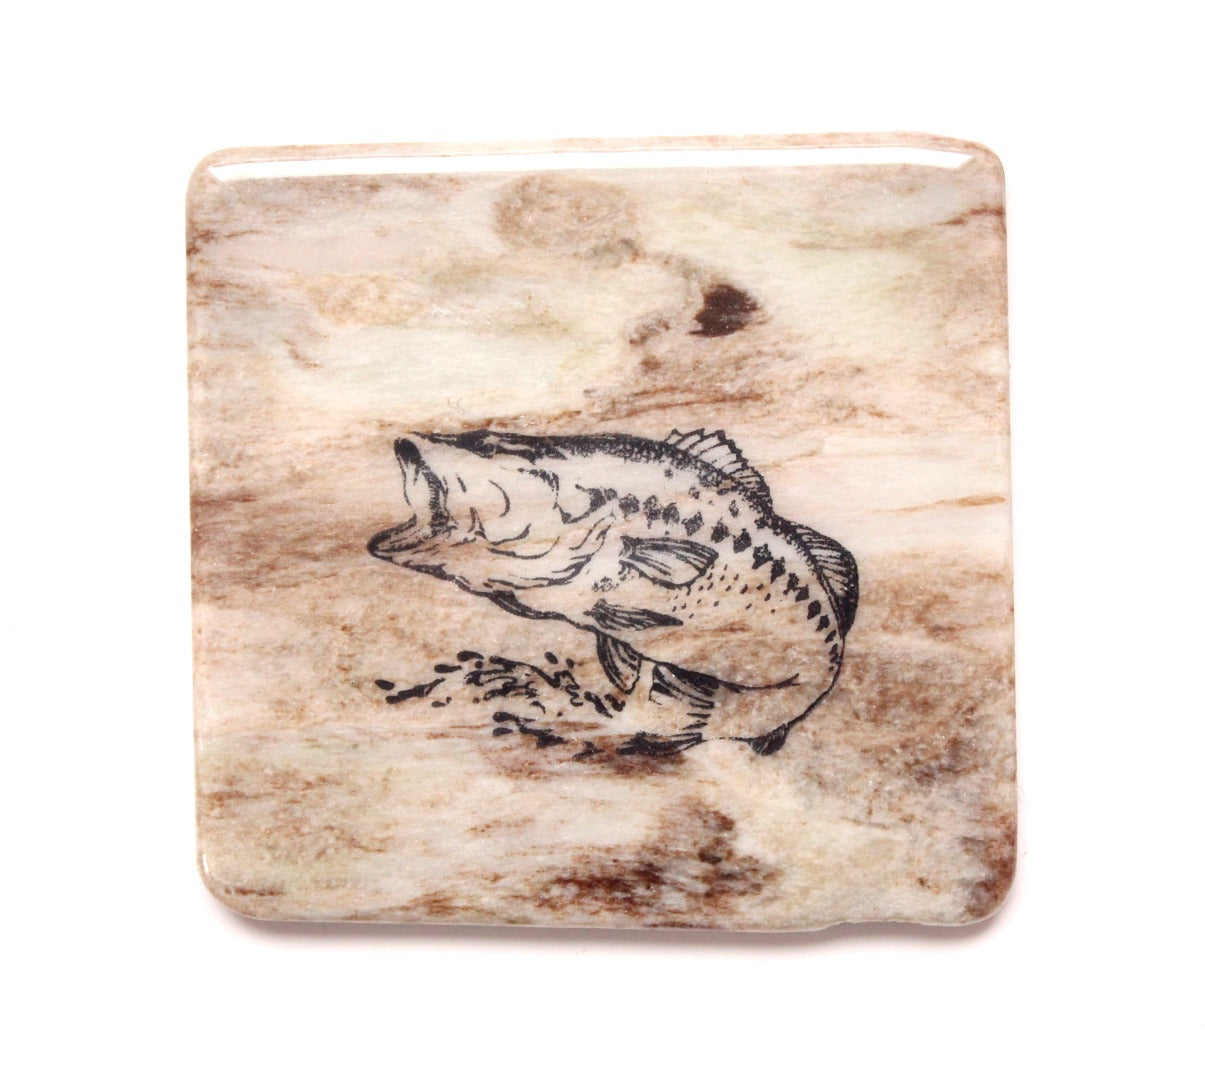 Made in Canada granite coaster with largemouth bass design.